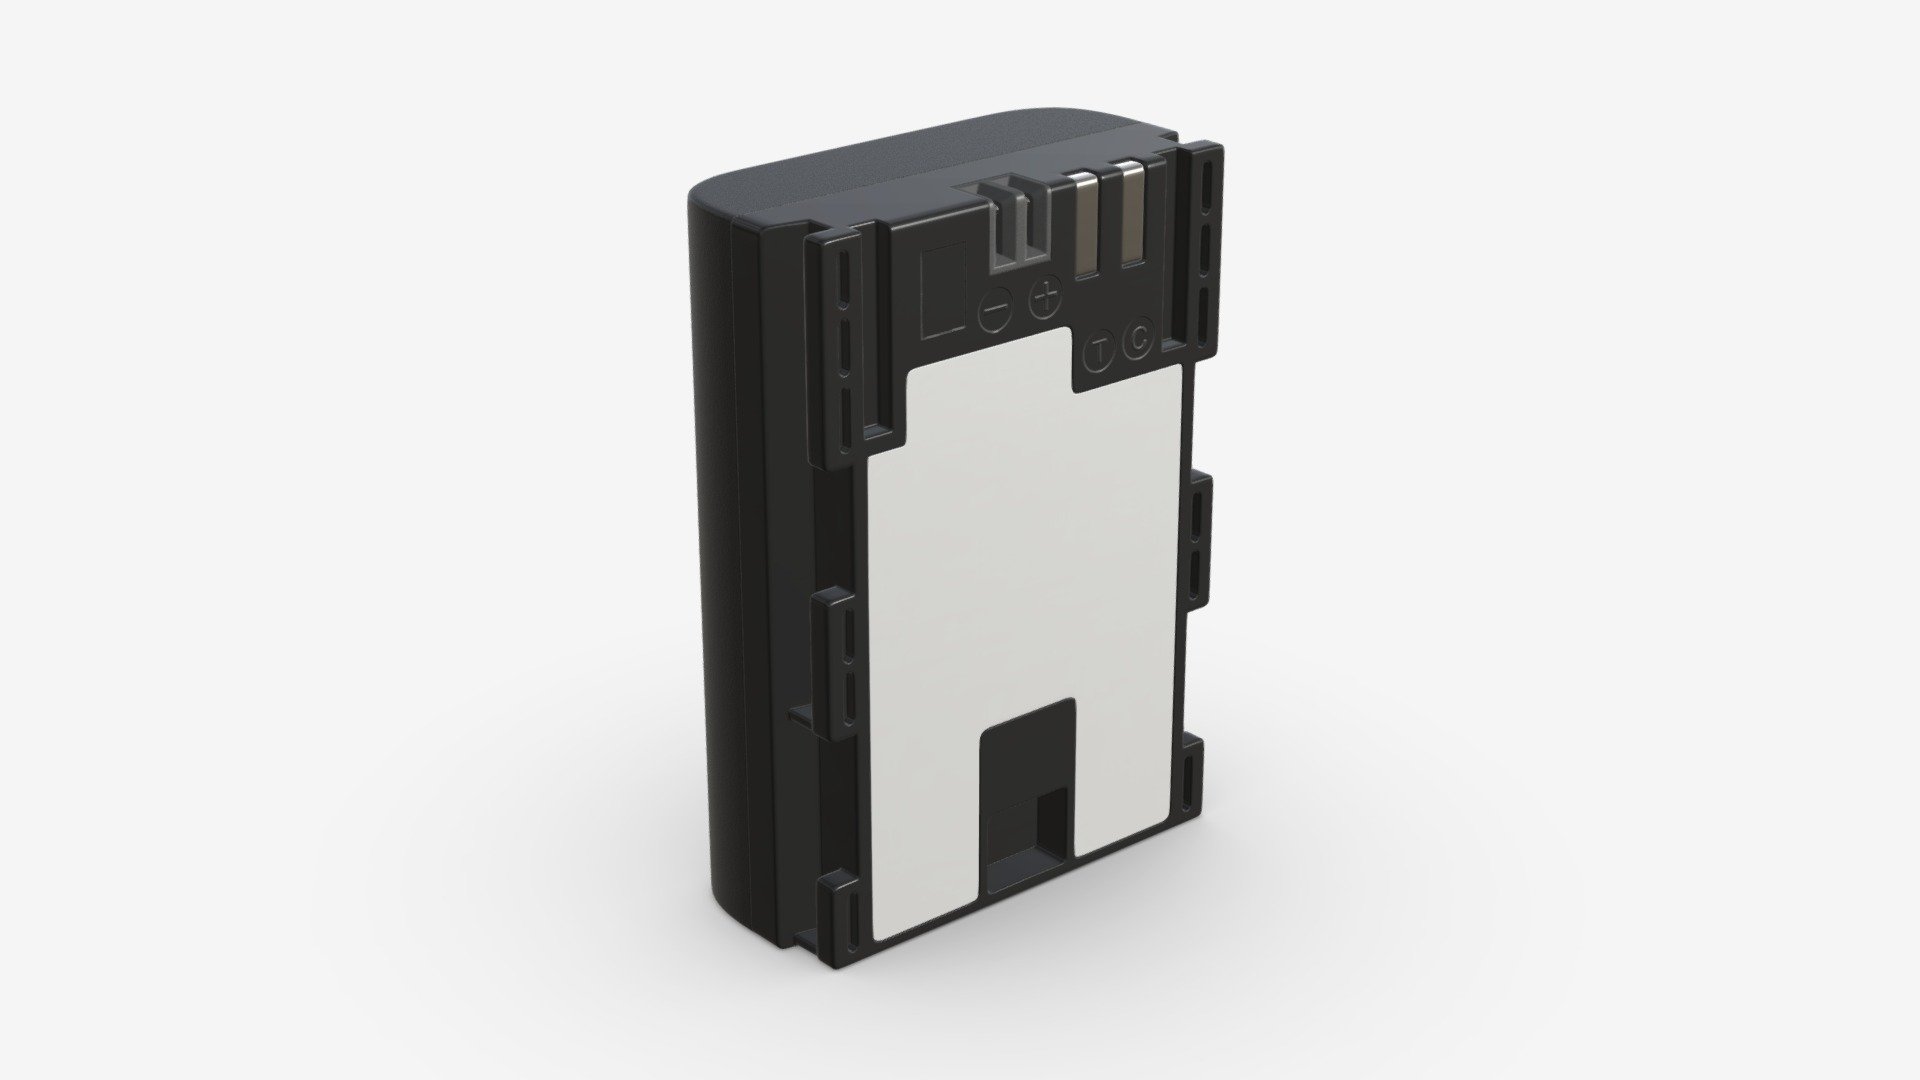 Canon LP-E6N Lithium-Ion Battery - Buy Royalty Free 3D model by HQ3DMOD (@AivisAstics) 3d model